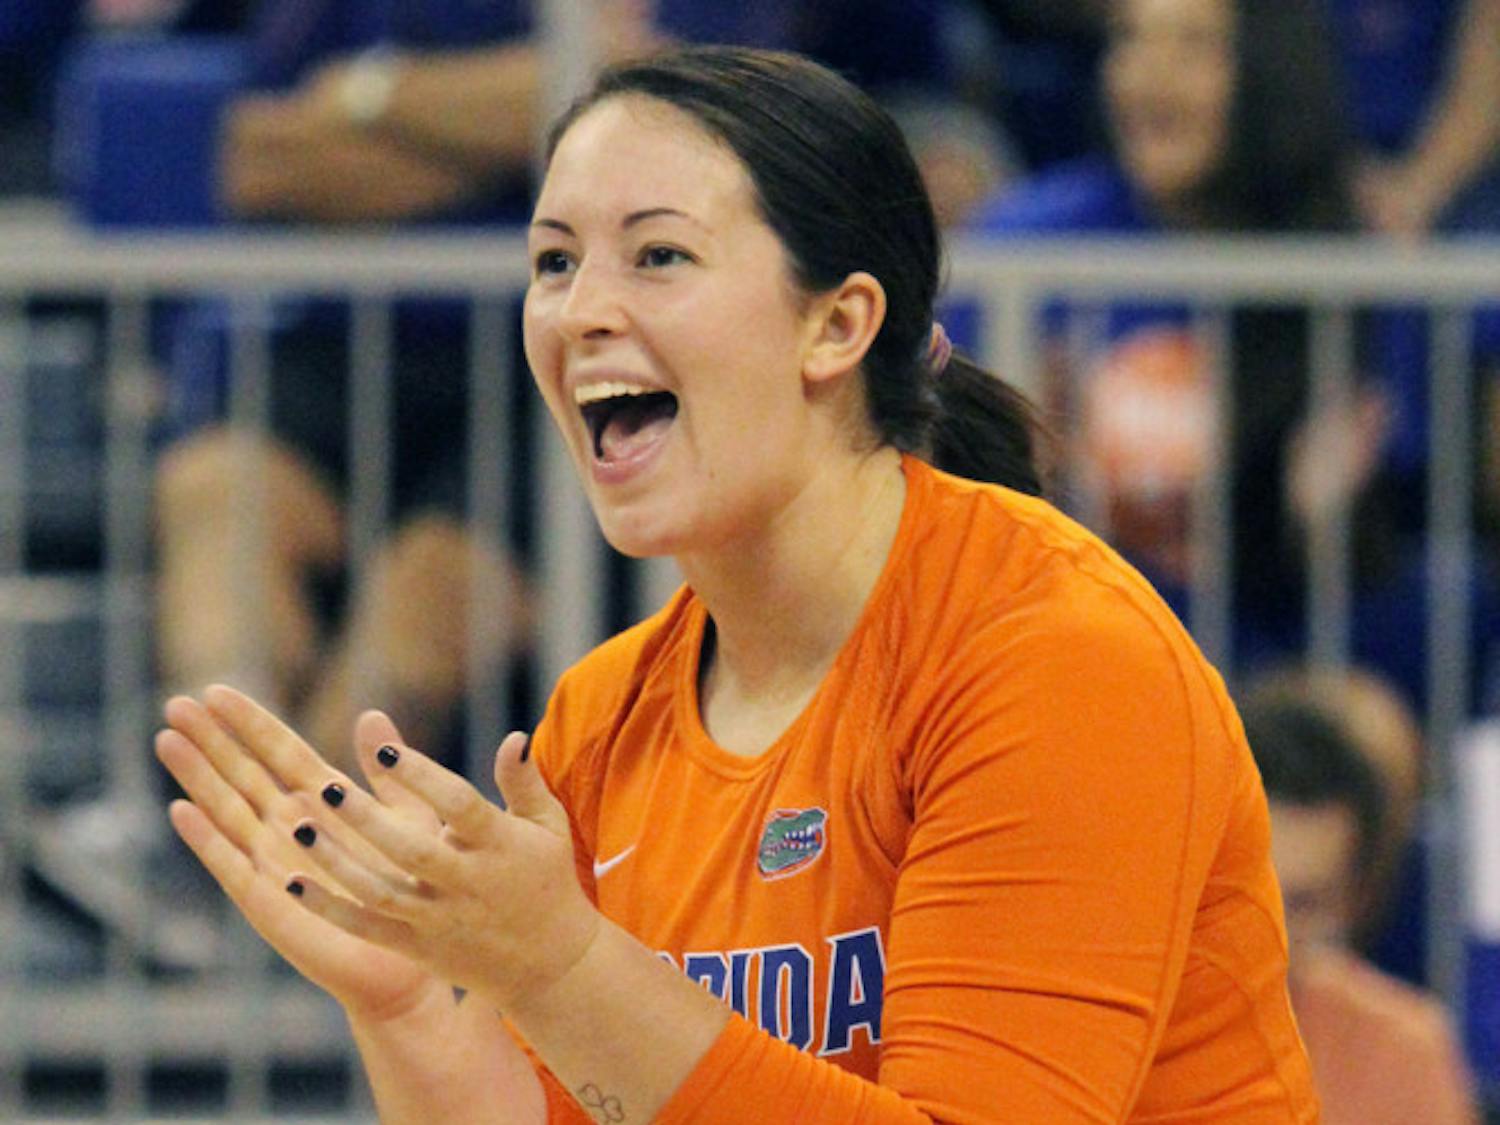 Junior libero Taylor Unroe reacts to a play during Florida’s three-set victory against FSU on Sept. 17 in the O’Connell Center.